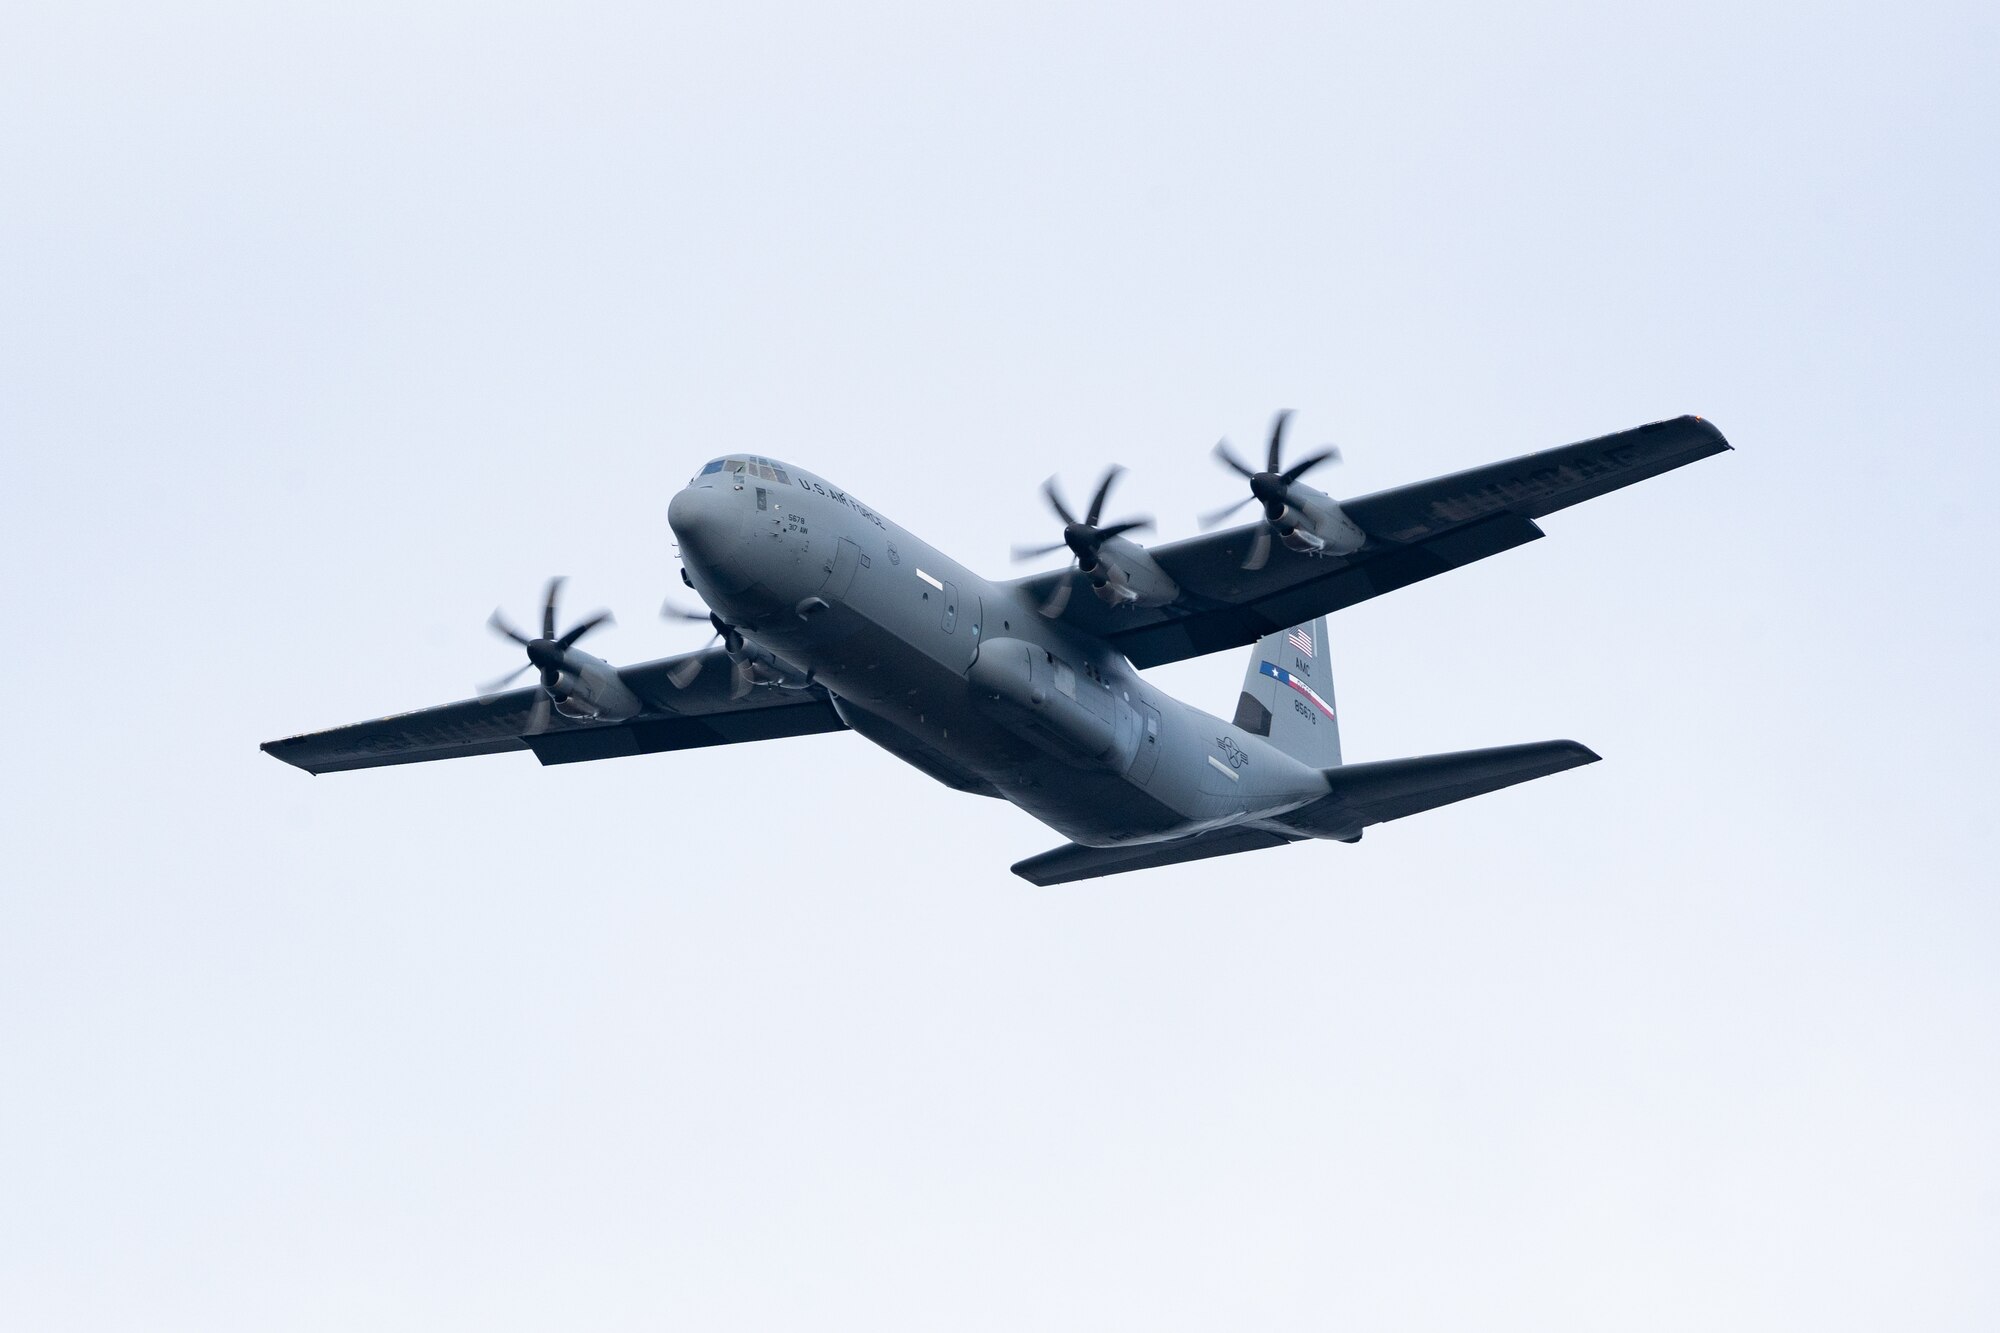 A U.S. Air Force C-130J Super Hercules assigned to the 317th Airlift Wing, Dyess Air Force Base, Texas, conducts cargo drop training during RED FLAG-Alaska 23-1, at Malemute Drop Zone on Joint Base Elmendorf-Richardson, Alaska, Oct. 19, 2022. RF-A 23-1 provides an opportunity for international engagement and training in an environment different from many unit’s home base. (U.S. Air Force photo by Airman 1st Class Julia Lebens)